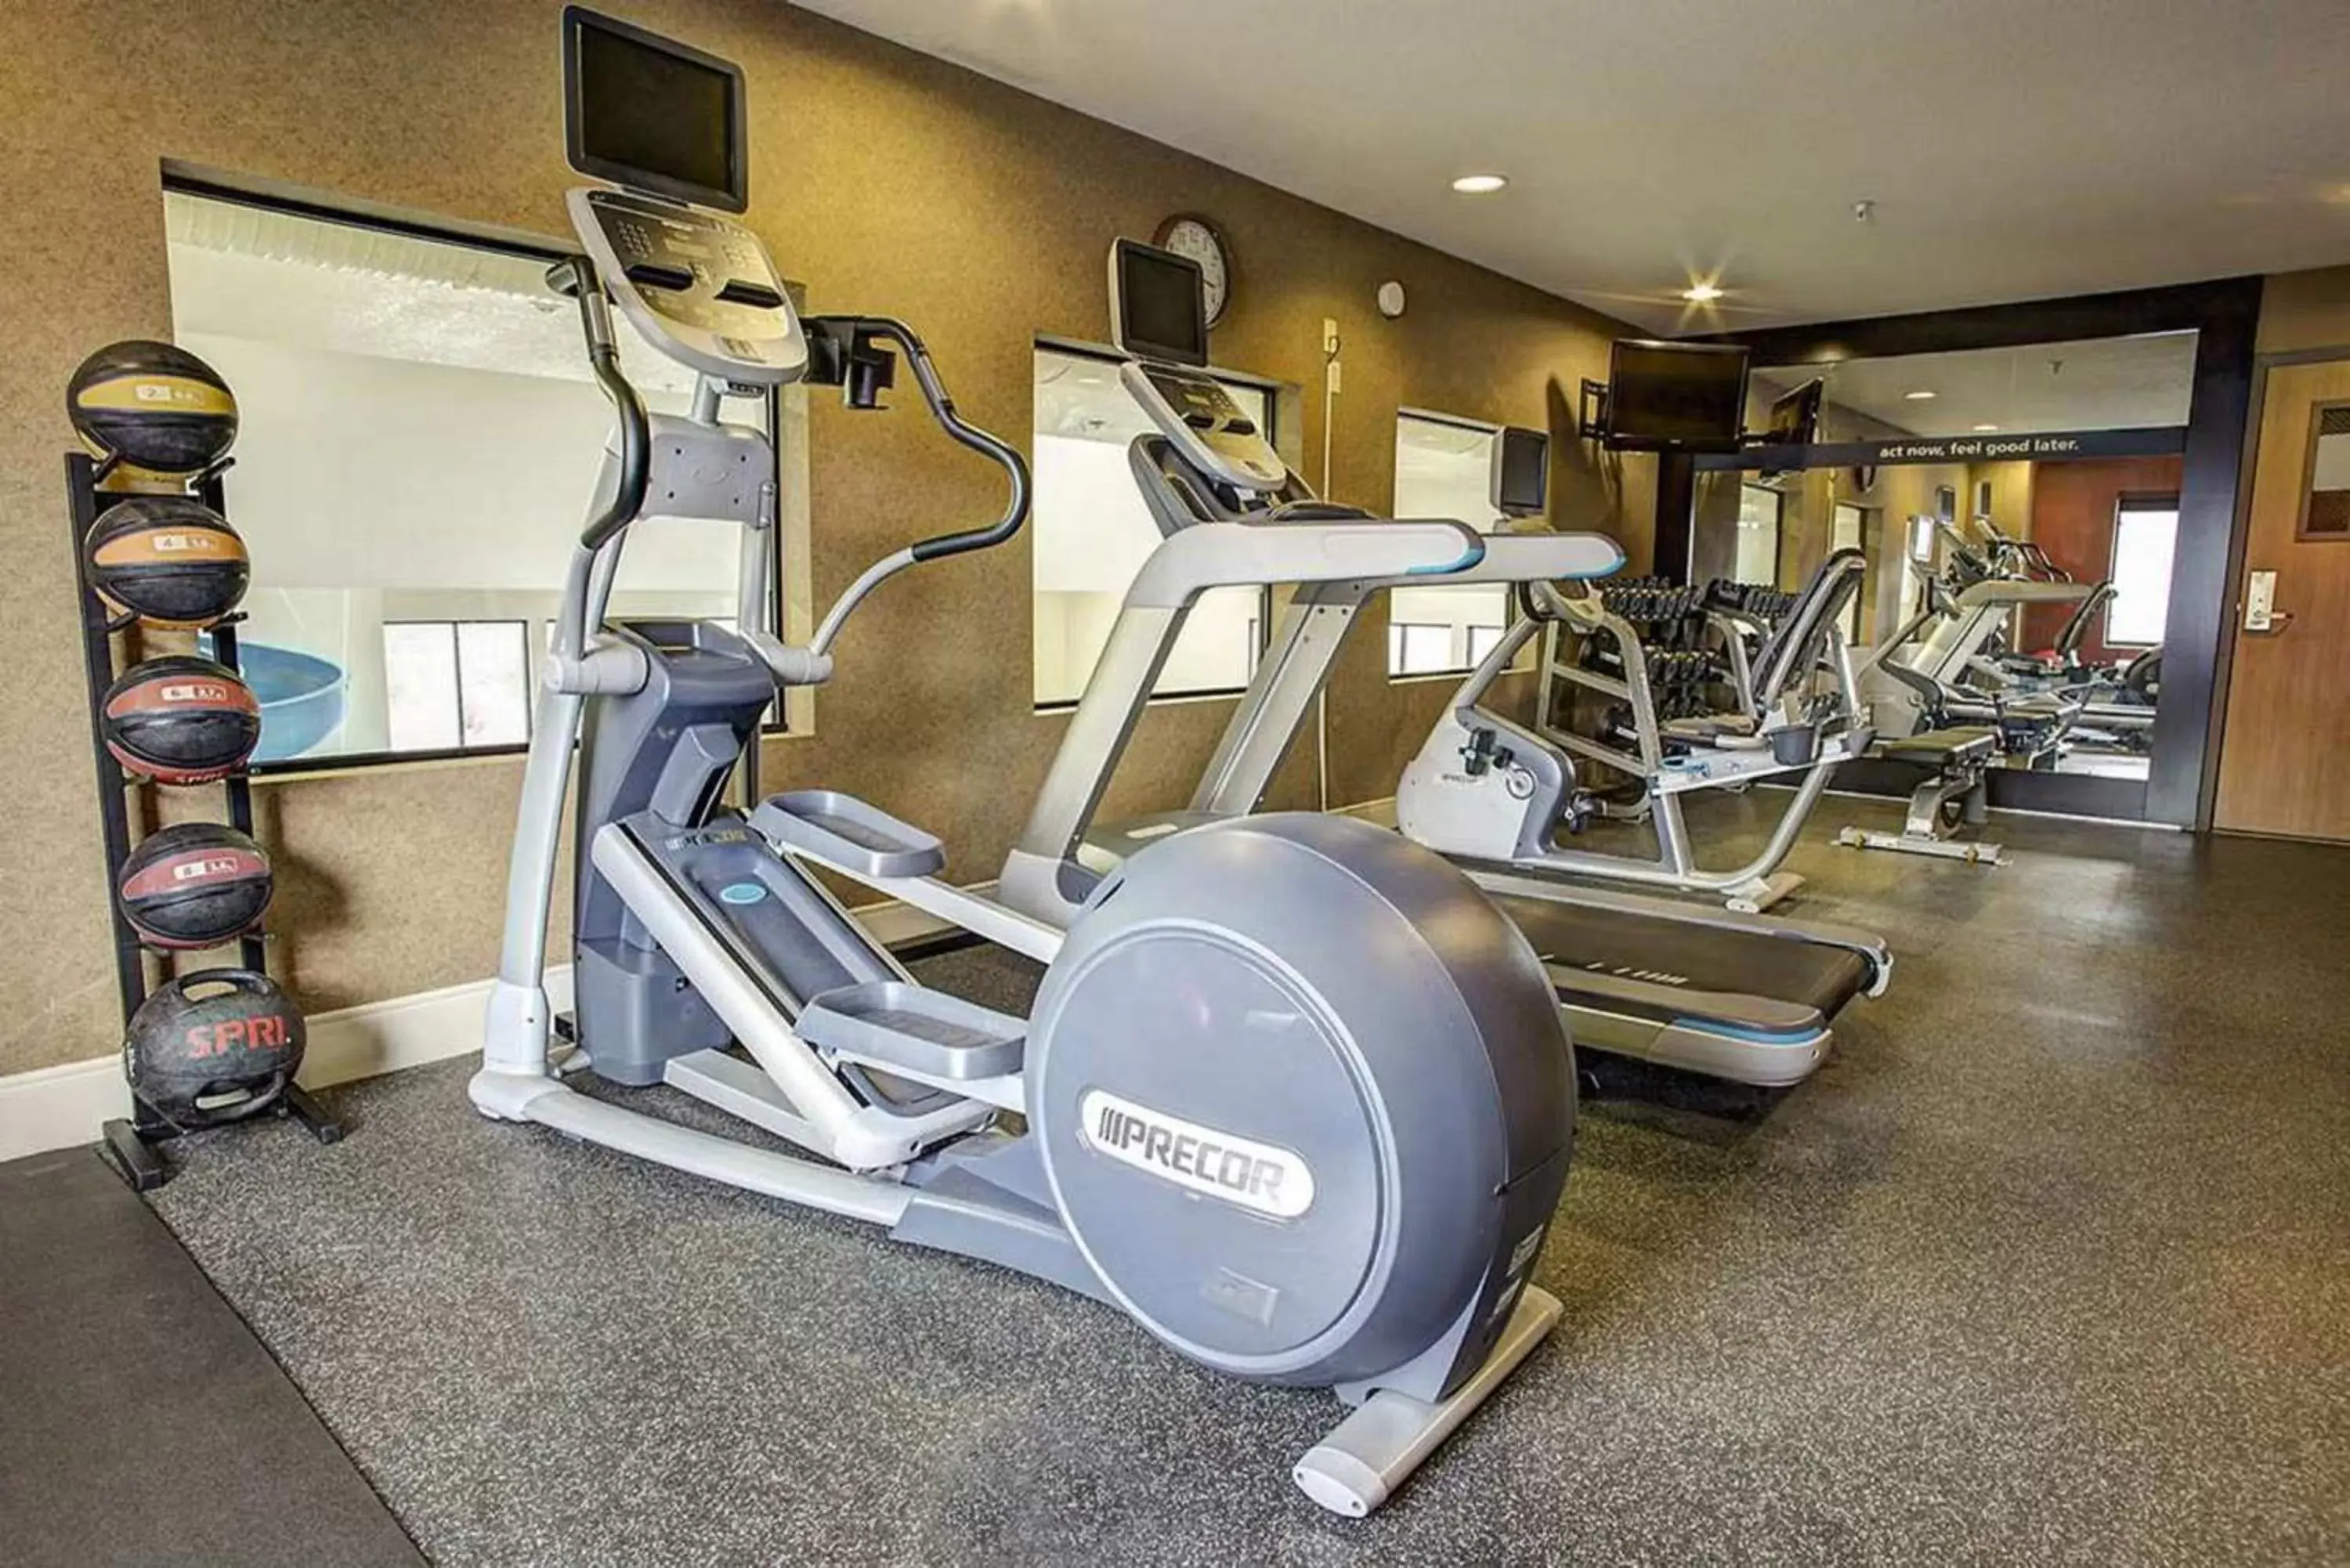 Fitness centre/facilities, Fitness Center/Facilities in Comfort Inn & Suites Rapid City near Mt Rushmore